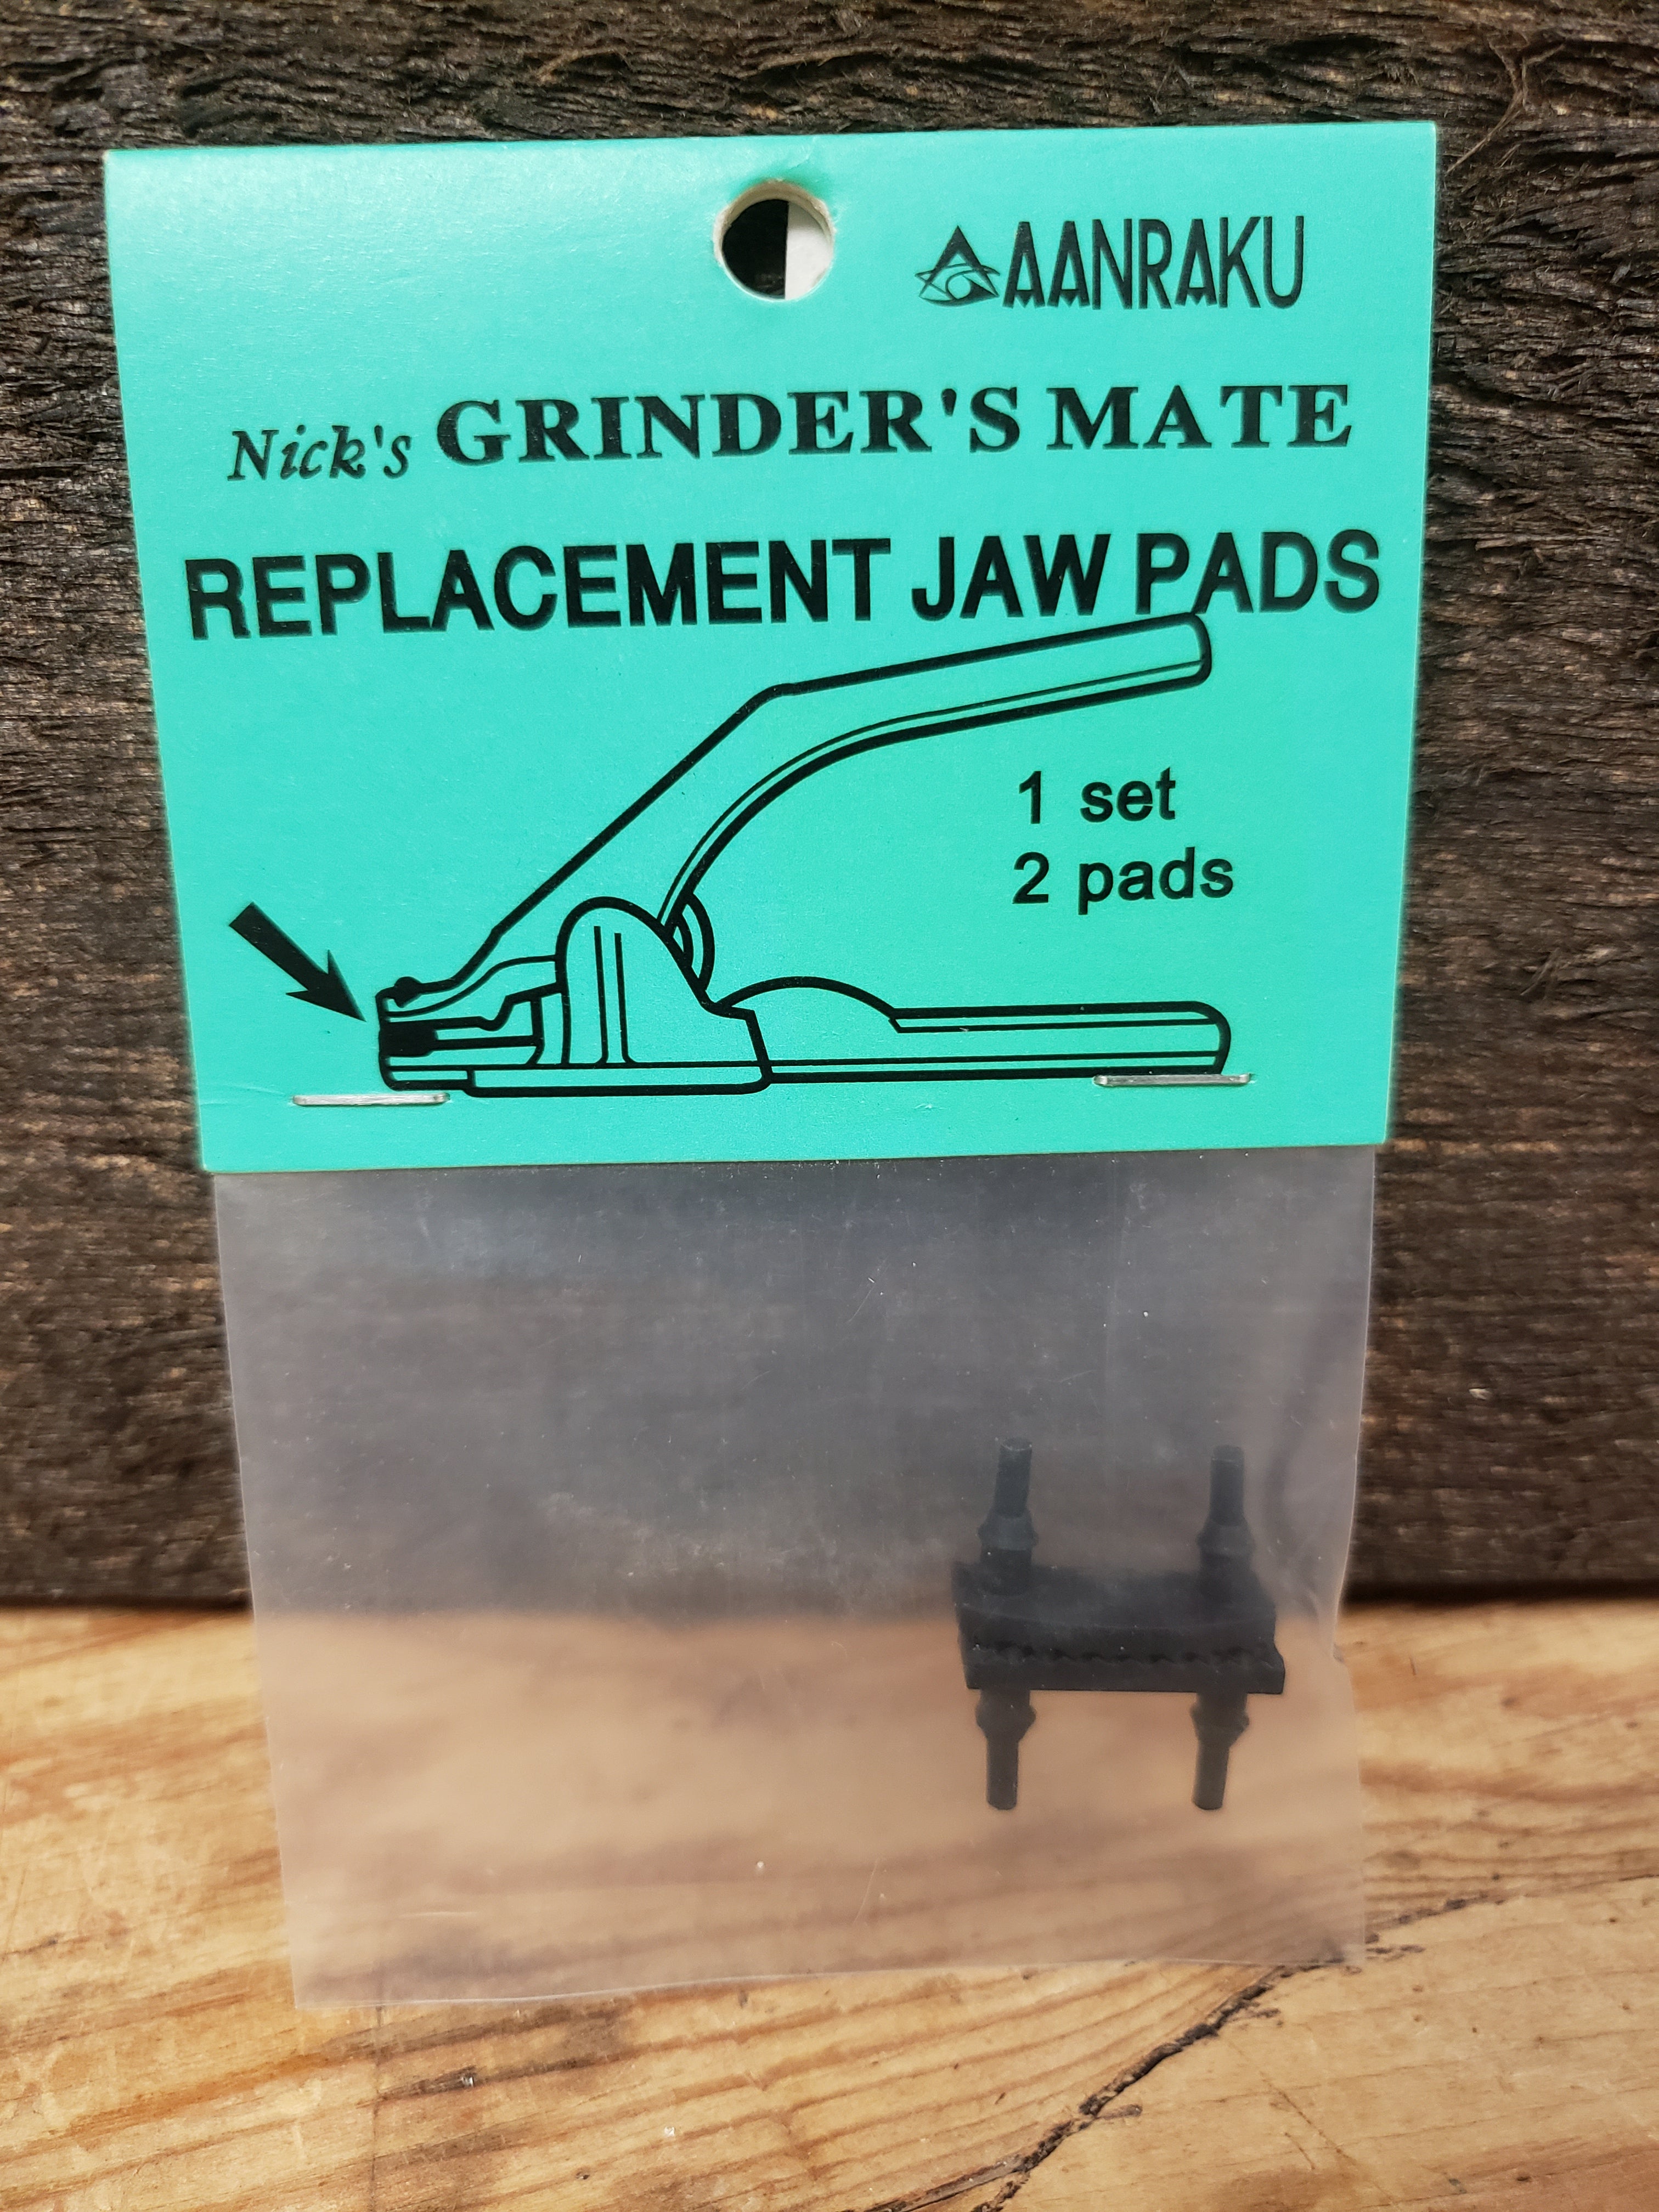 Replacement Jaw Pads